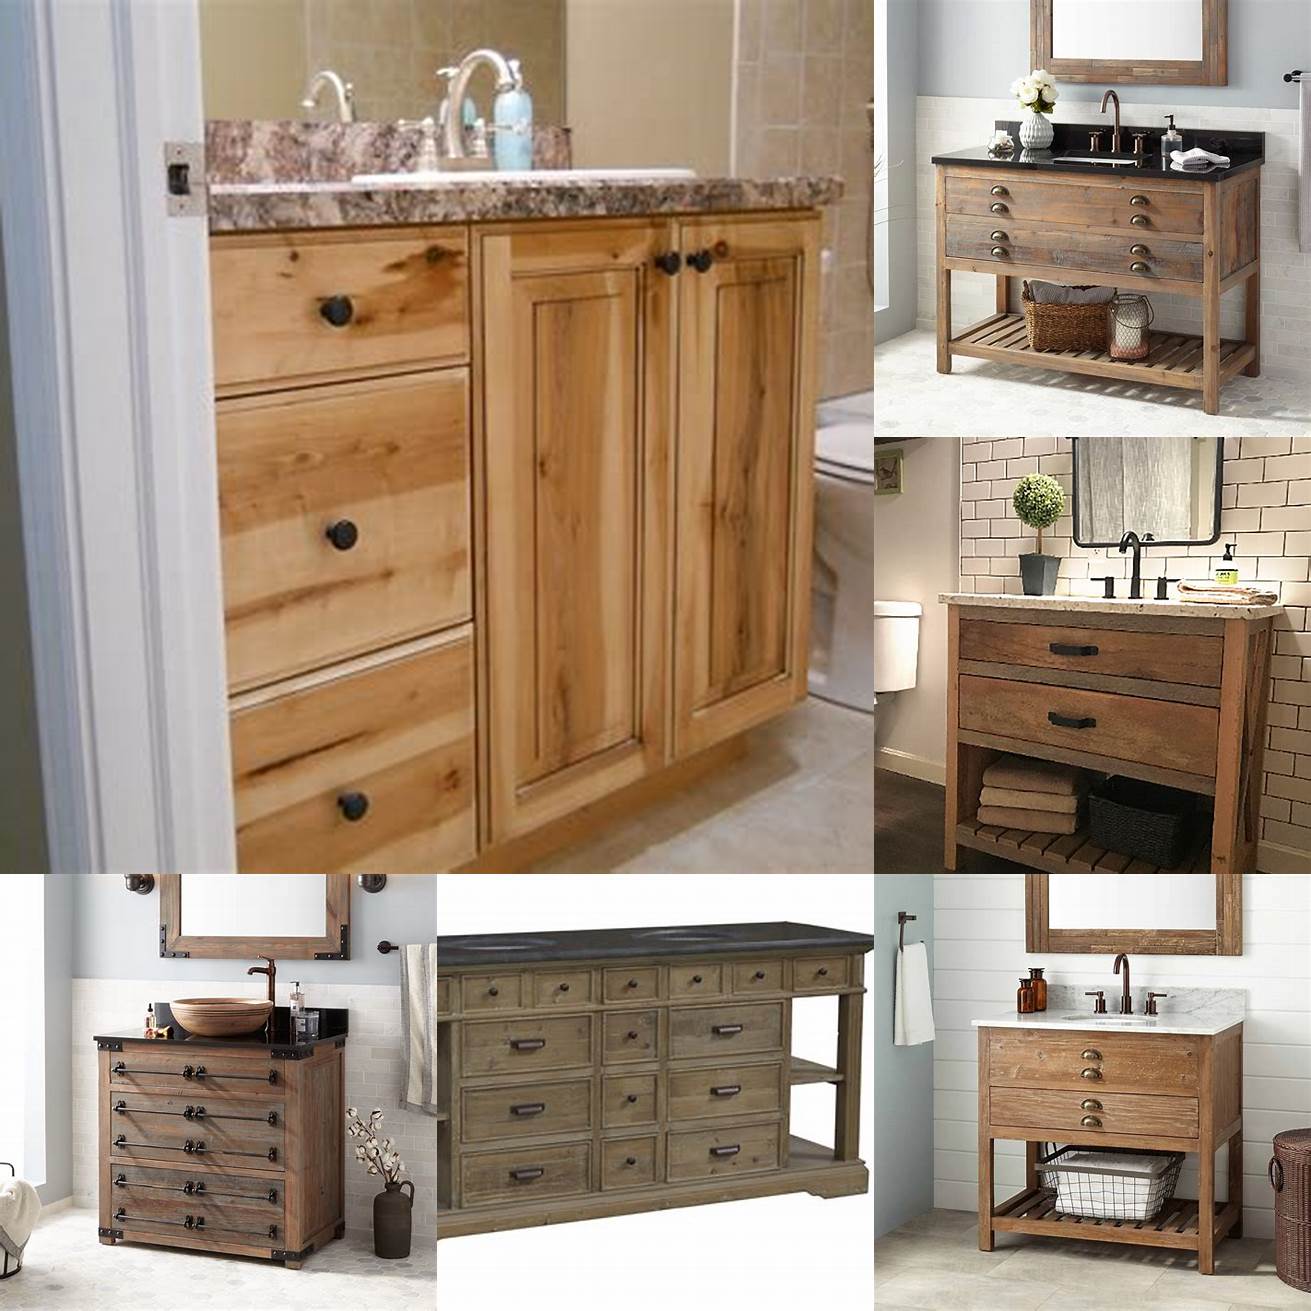 Pine Pine is a popular choice for wood vanities because its affordable and has a lighter color that can brighten up a bathroom